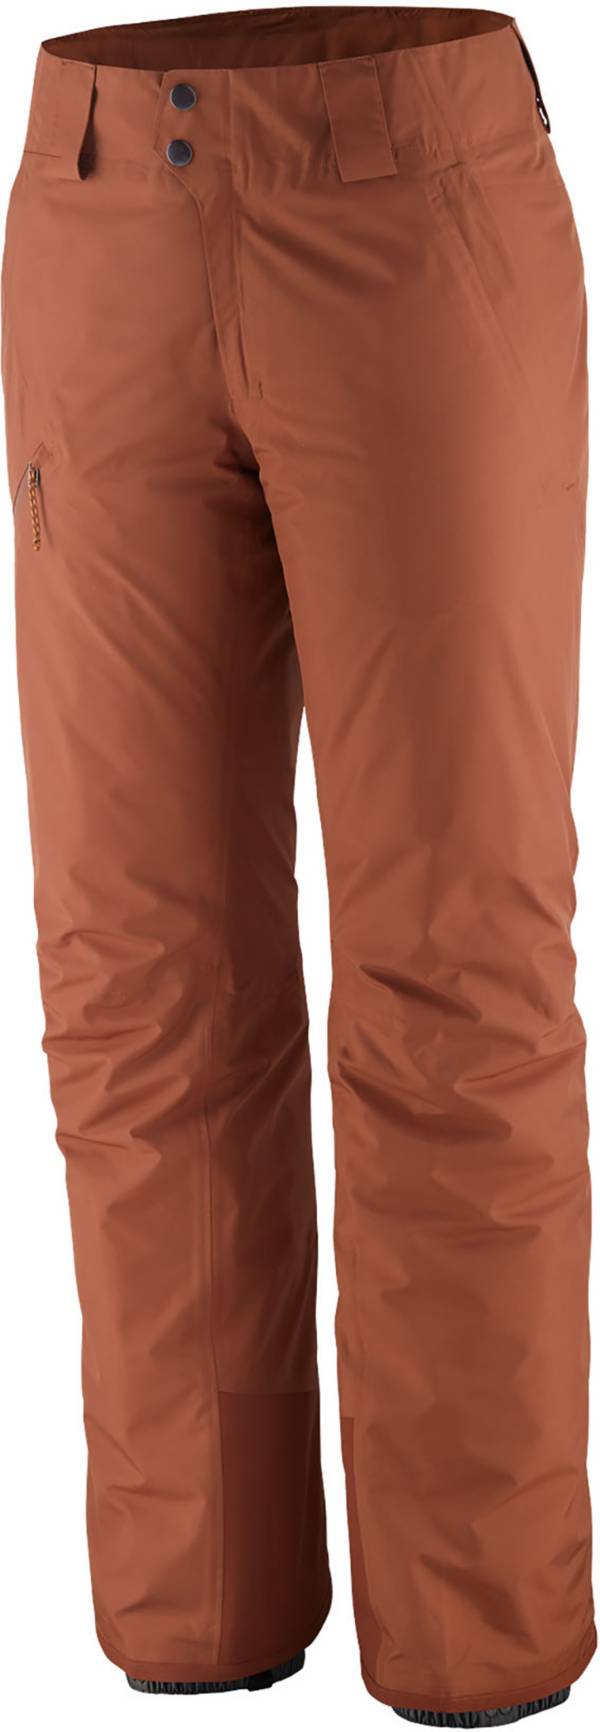 Patagonia Women's Insulated Powder Town Ski Pants product image